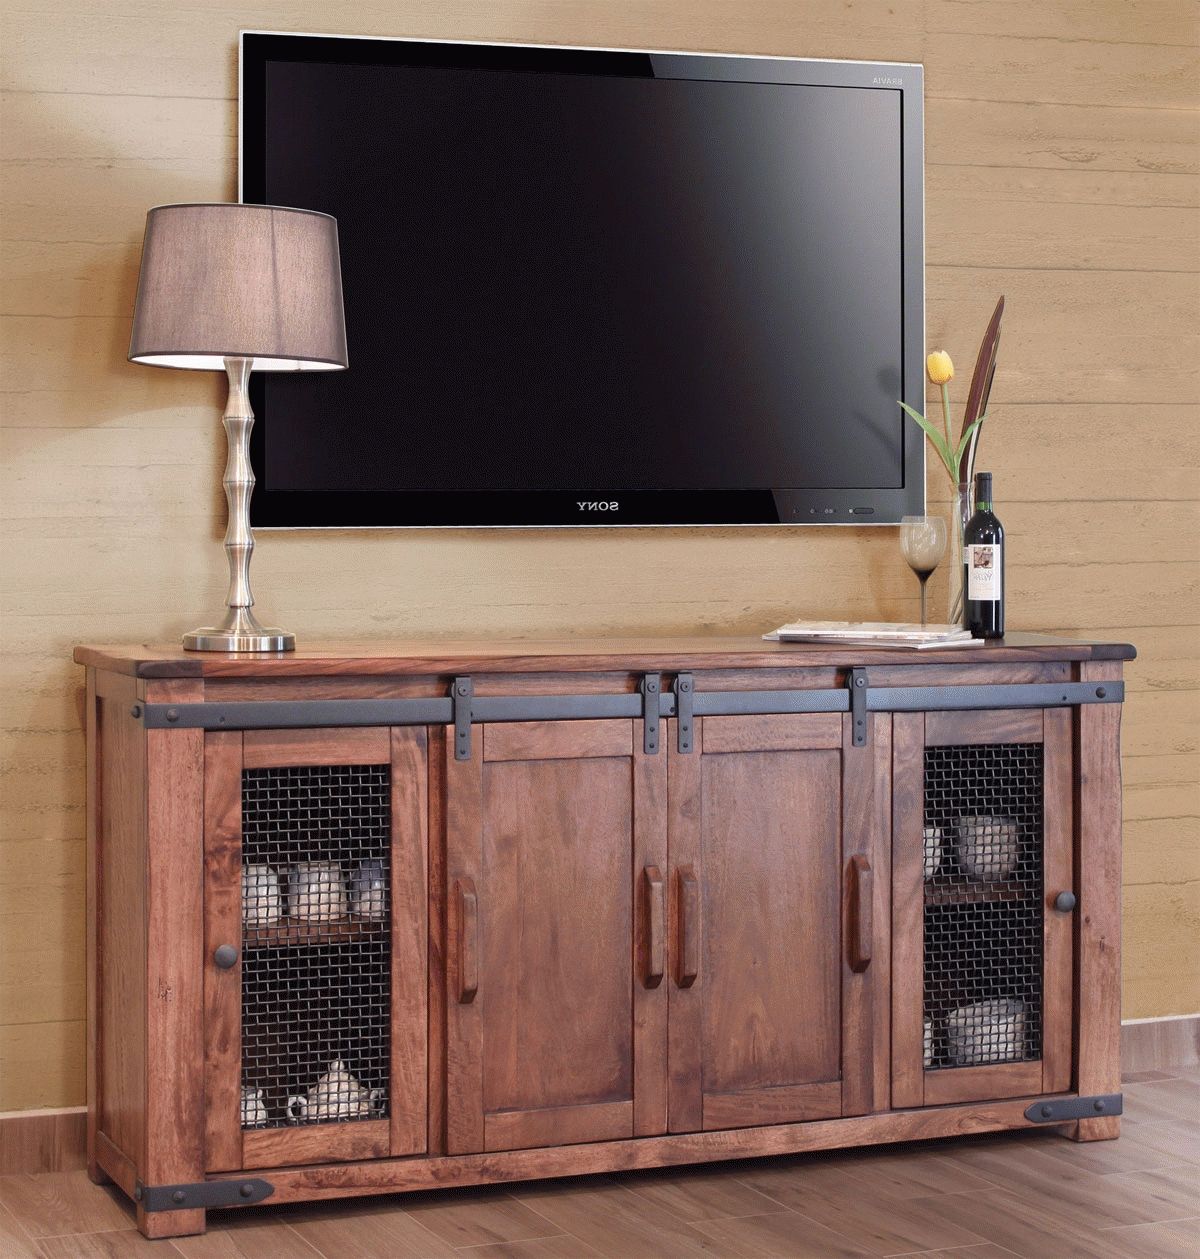 Rustic Tv Stand, Wood Tv Stand, Pine Tv Stand Regarding Pine Tv Stands (View 7 of 20)